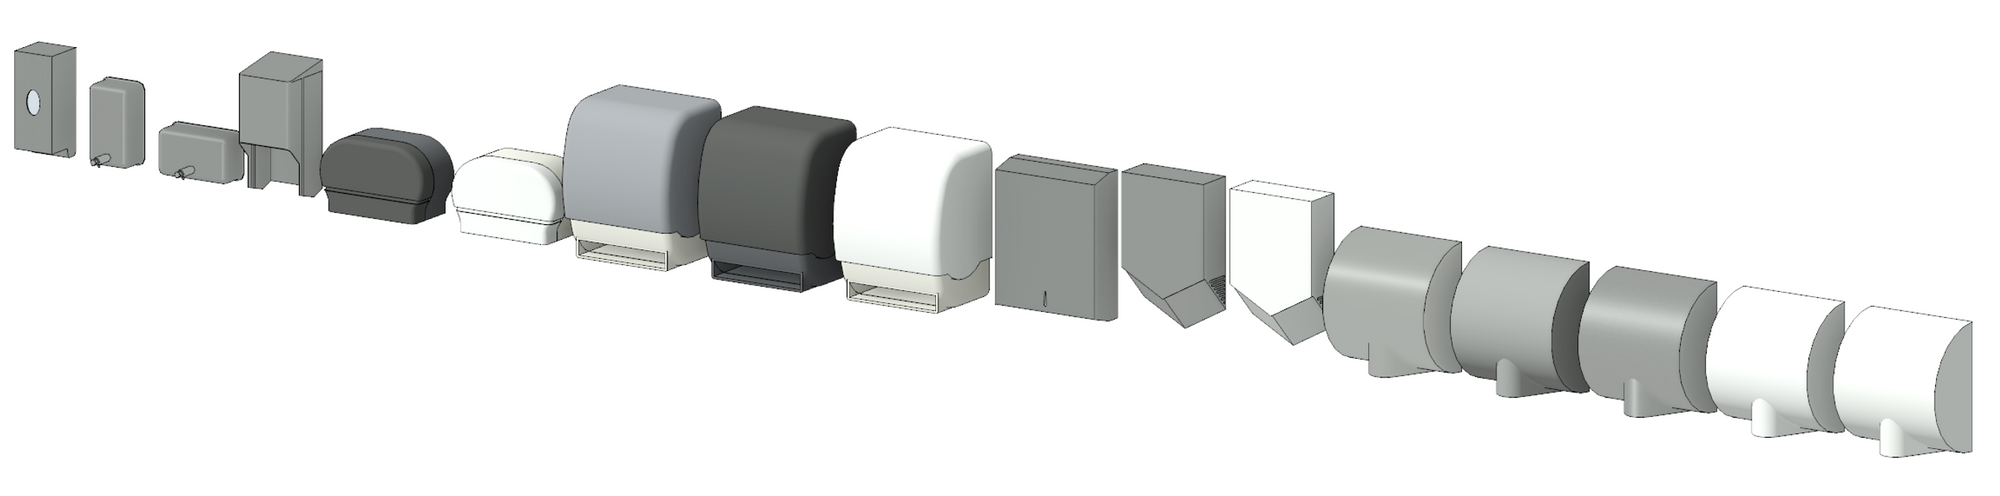 Revit 3D view of all accessories in Medium level of detail.